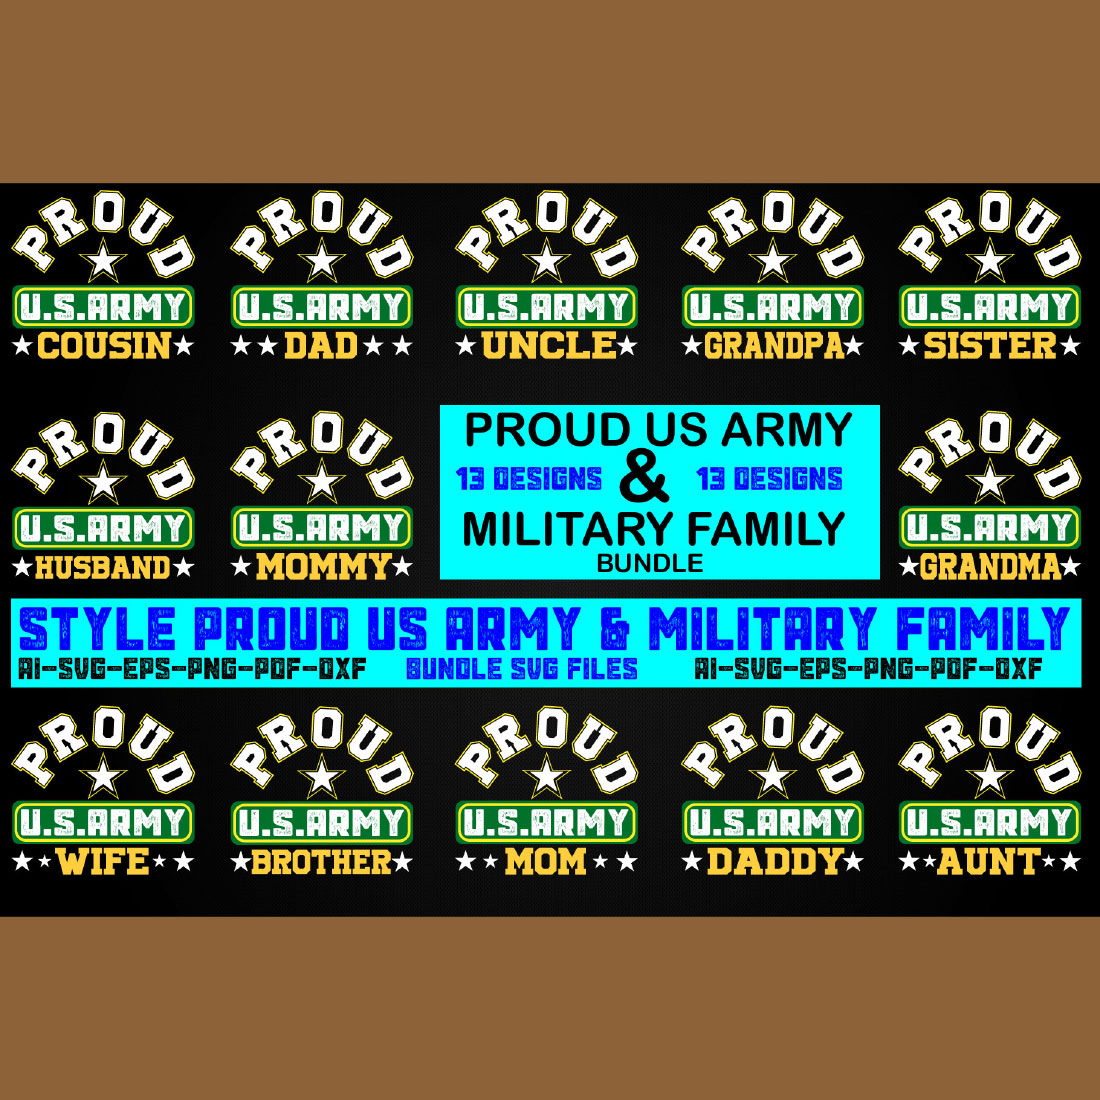 Style Proud US Army & Military Family Bundle SVG Files Vol-01 cover image.